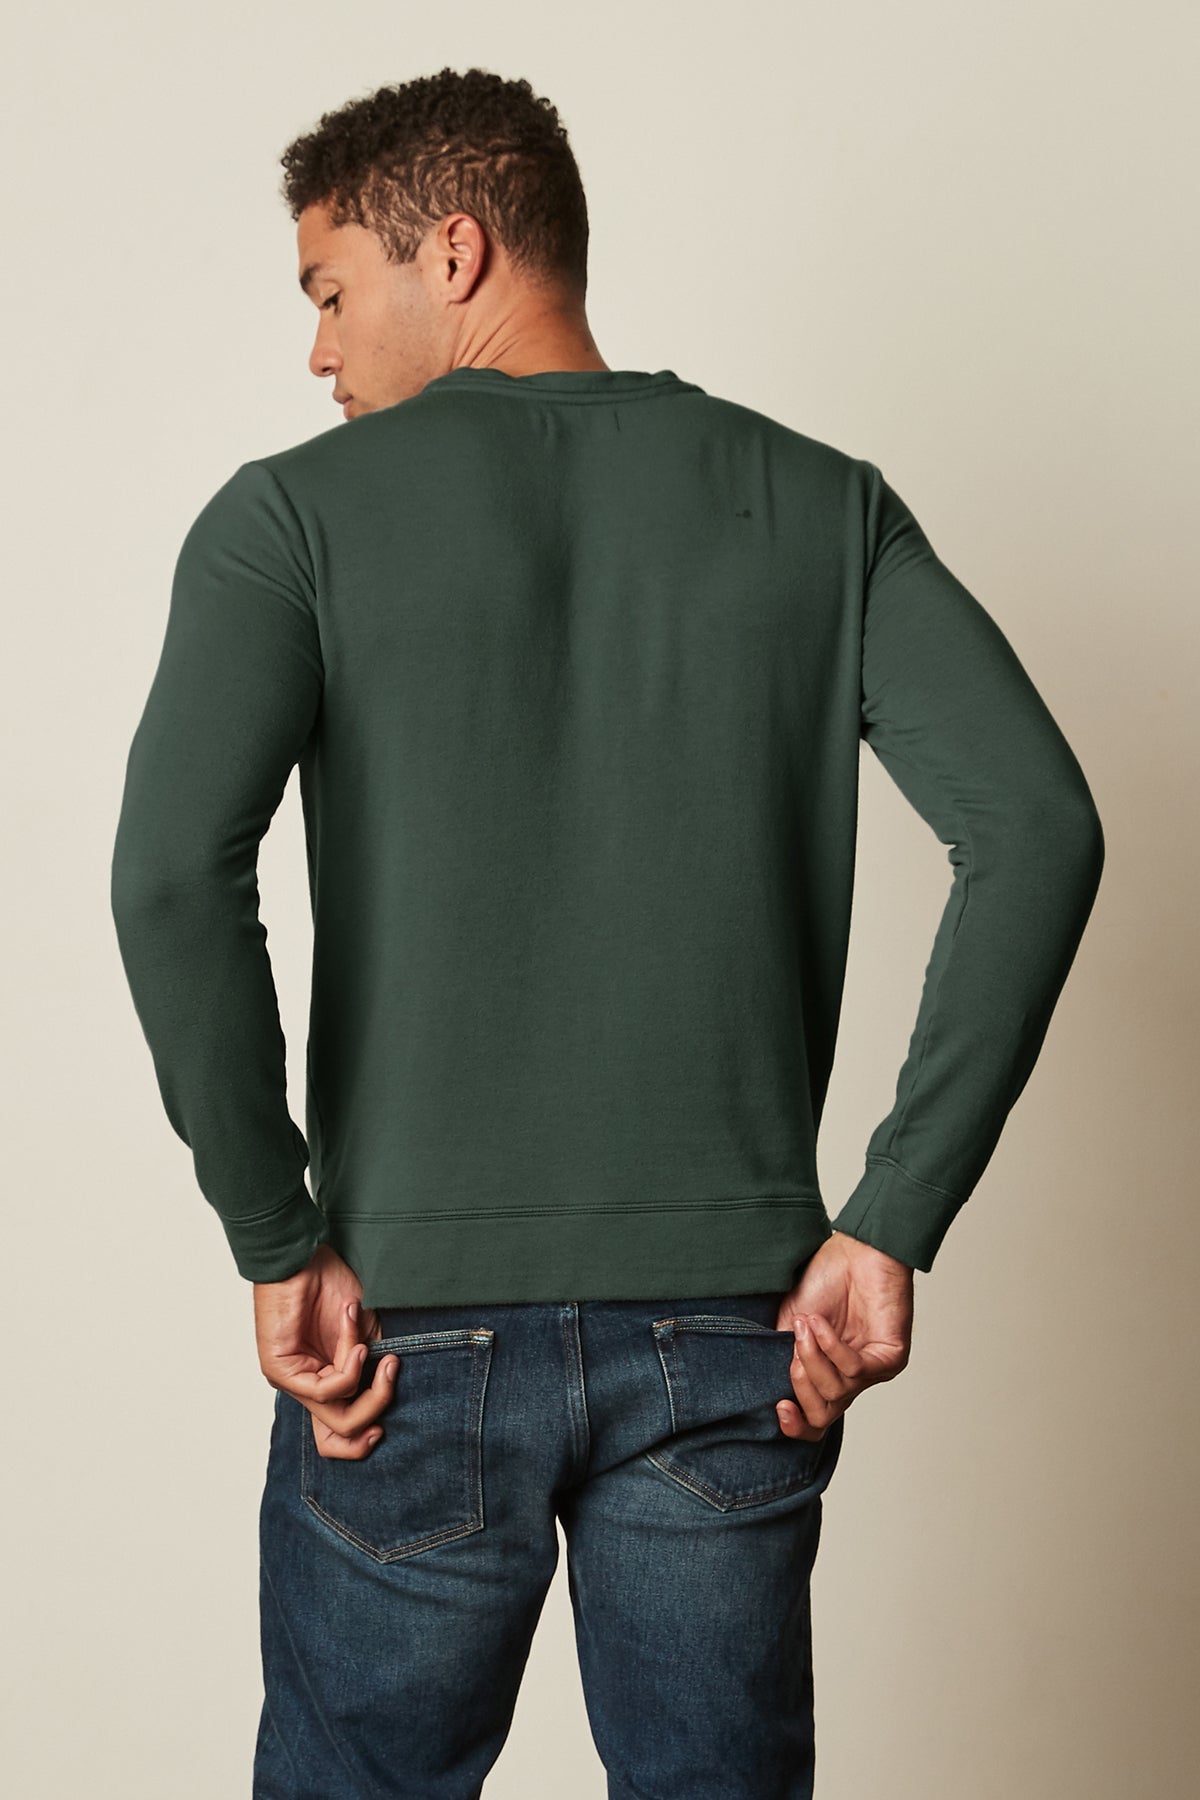 The back view of a man wearing a Velvet by Graham & Spencer SOREN LUXE FLEECE PULLOVER and jeans.-26632270020801